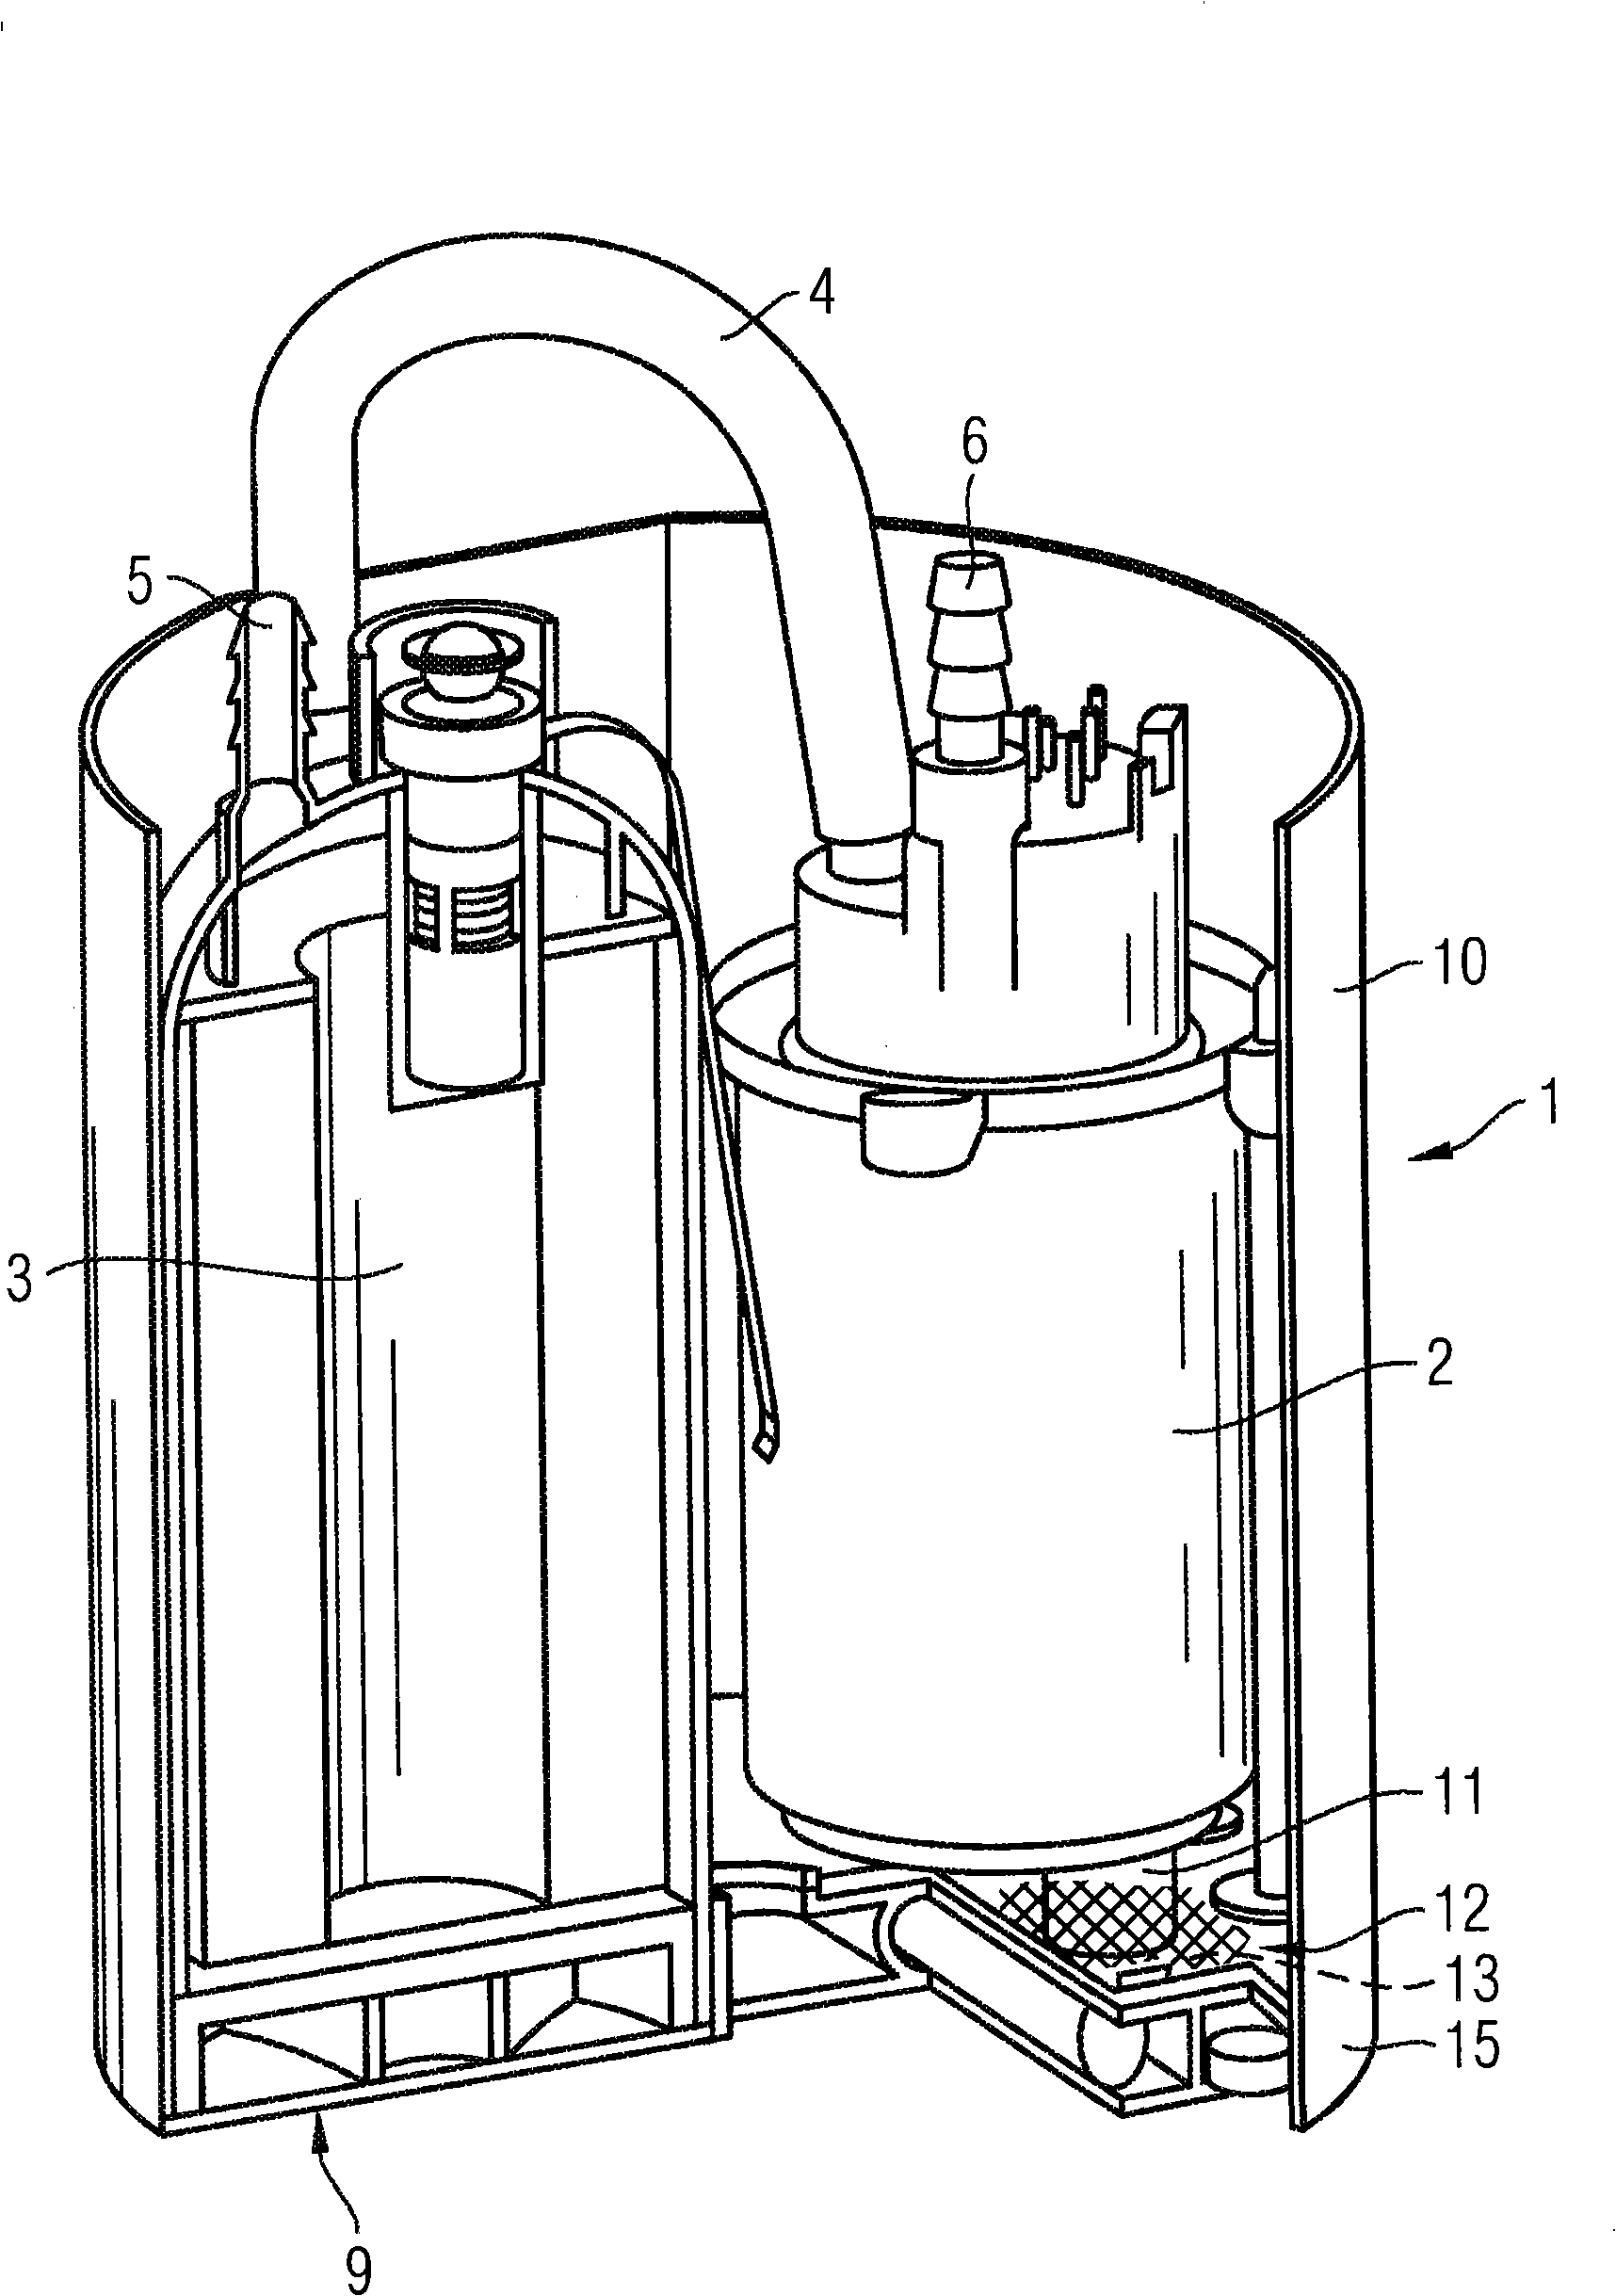 Device for collecting fuel in a fuel tank